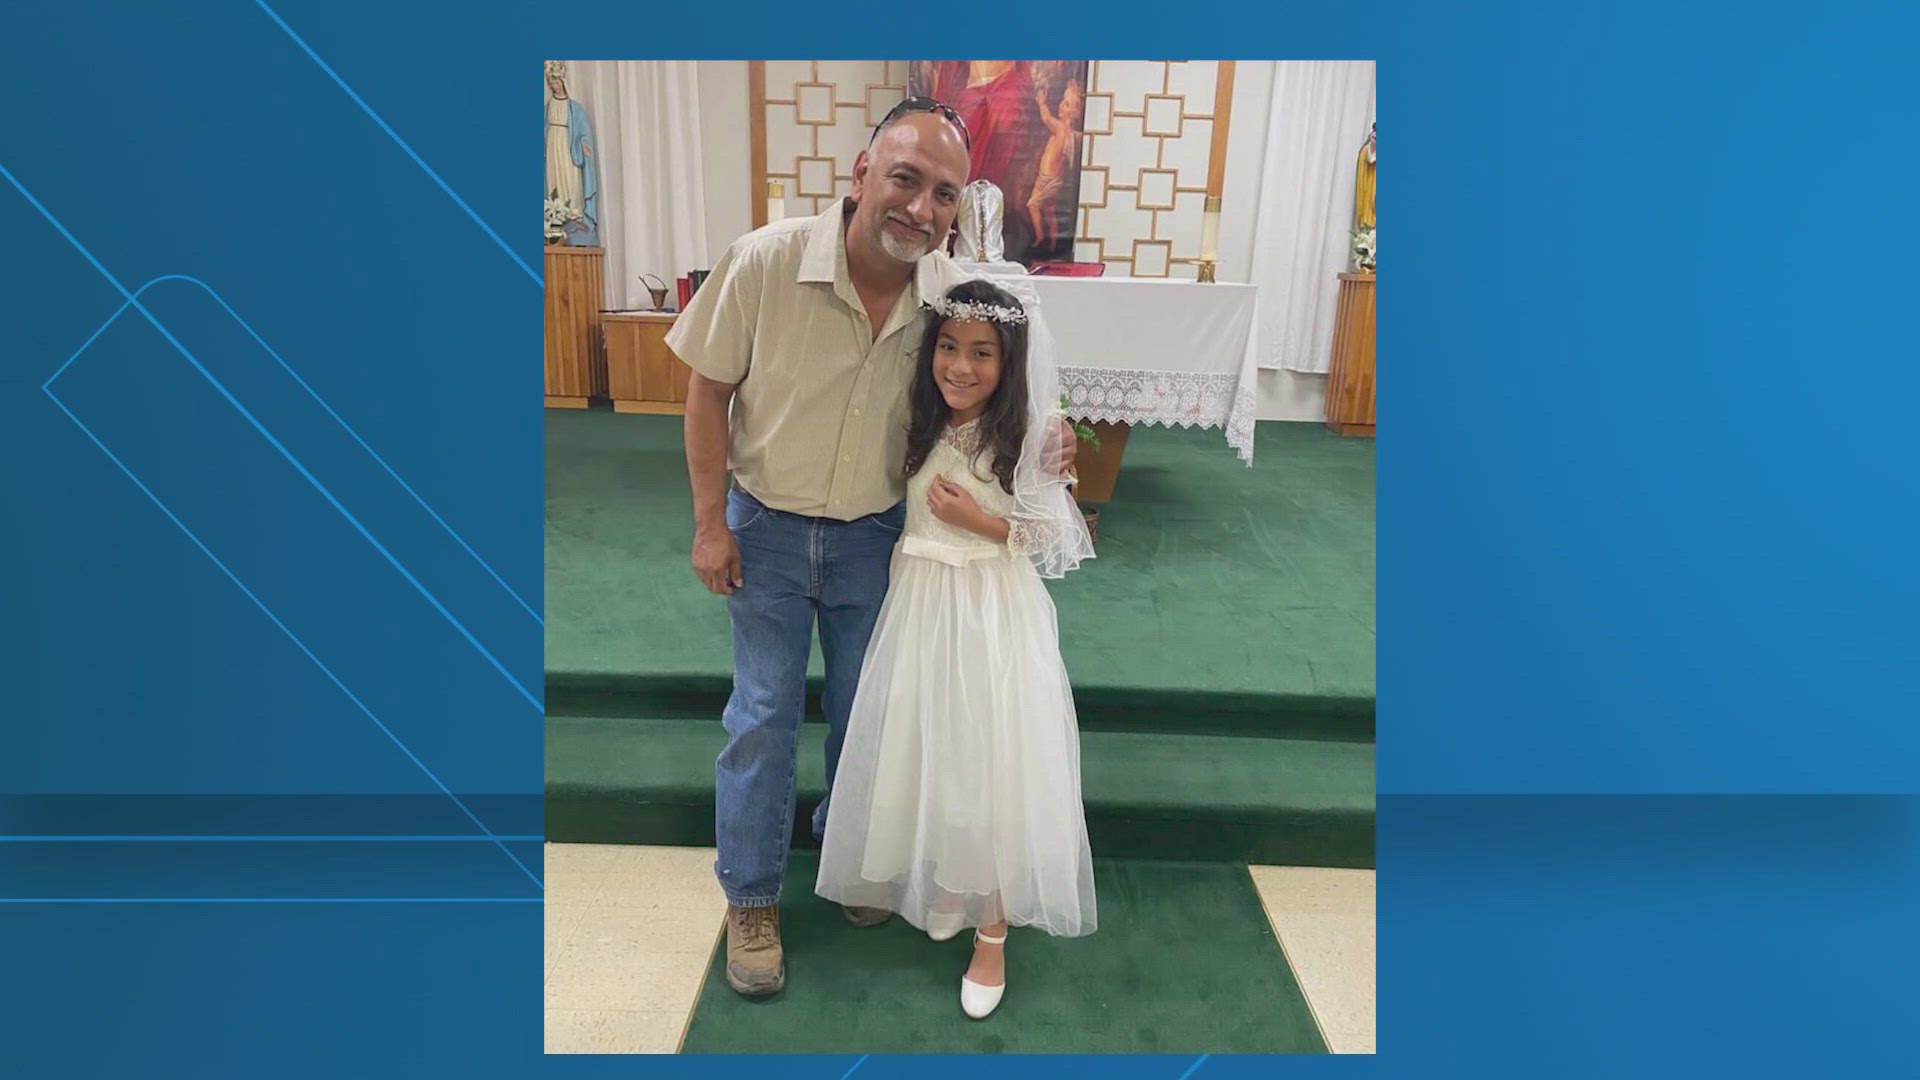 Jesse Rizo is the uncle of Jackie Cazares, who was killed in the mass shooting at Robb Elementary.